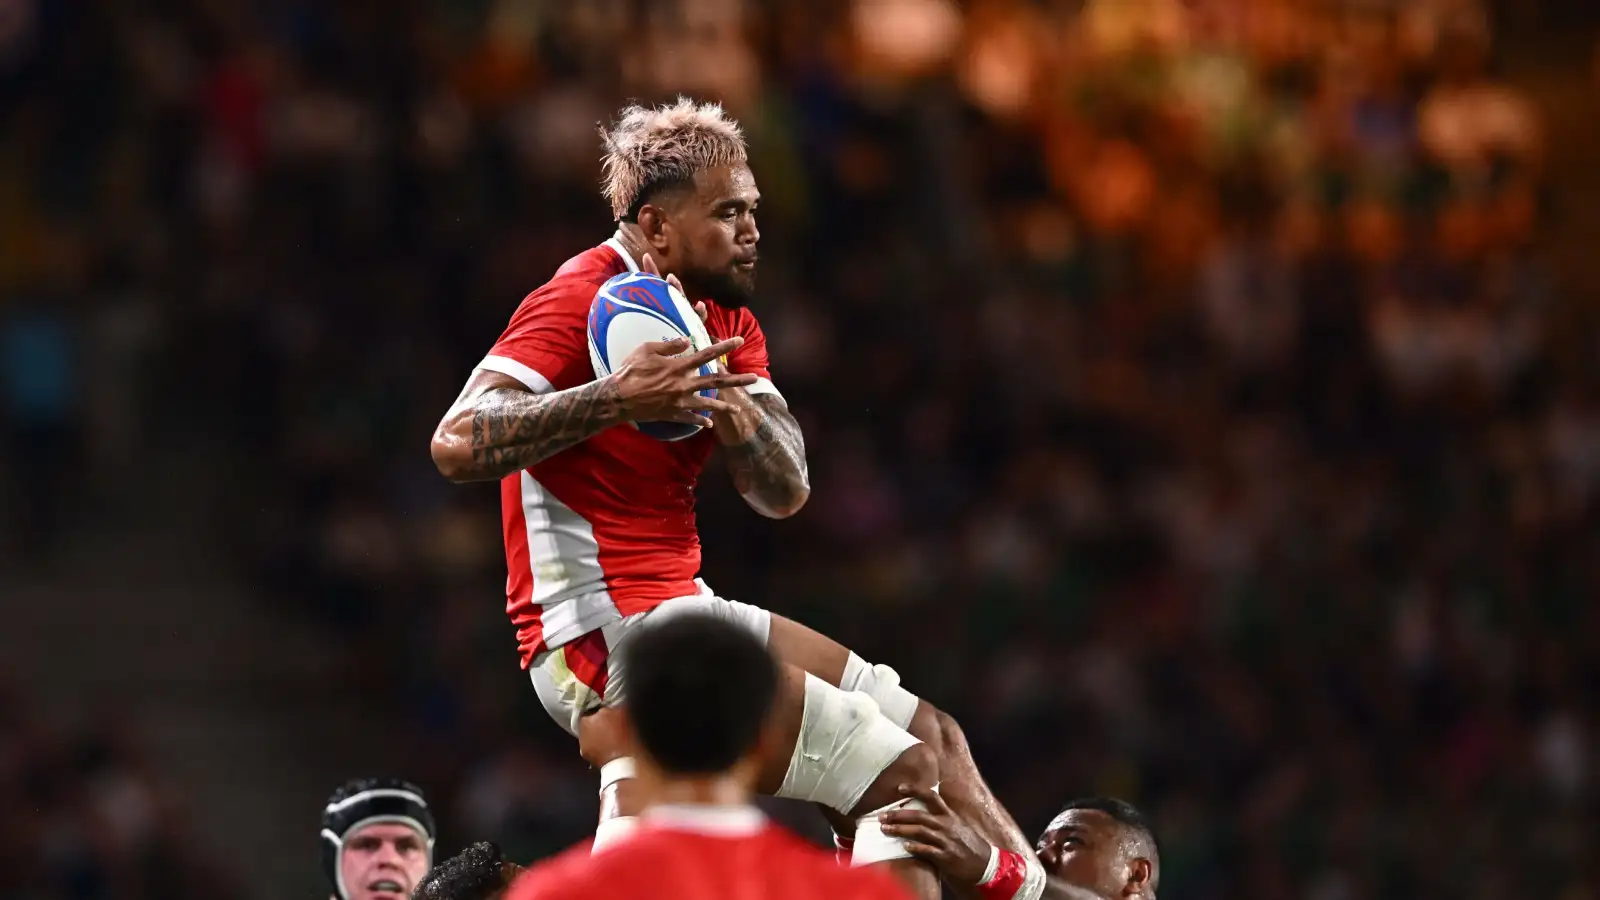 Tonga's Vaea Fifita catches the ball in a lineout during the Rugby World Cup Pool B match between Ireland and Tonga at the State de la Beaujoire in Nantes